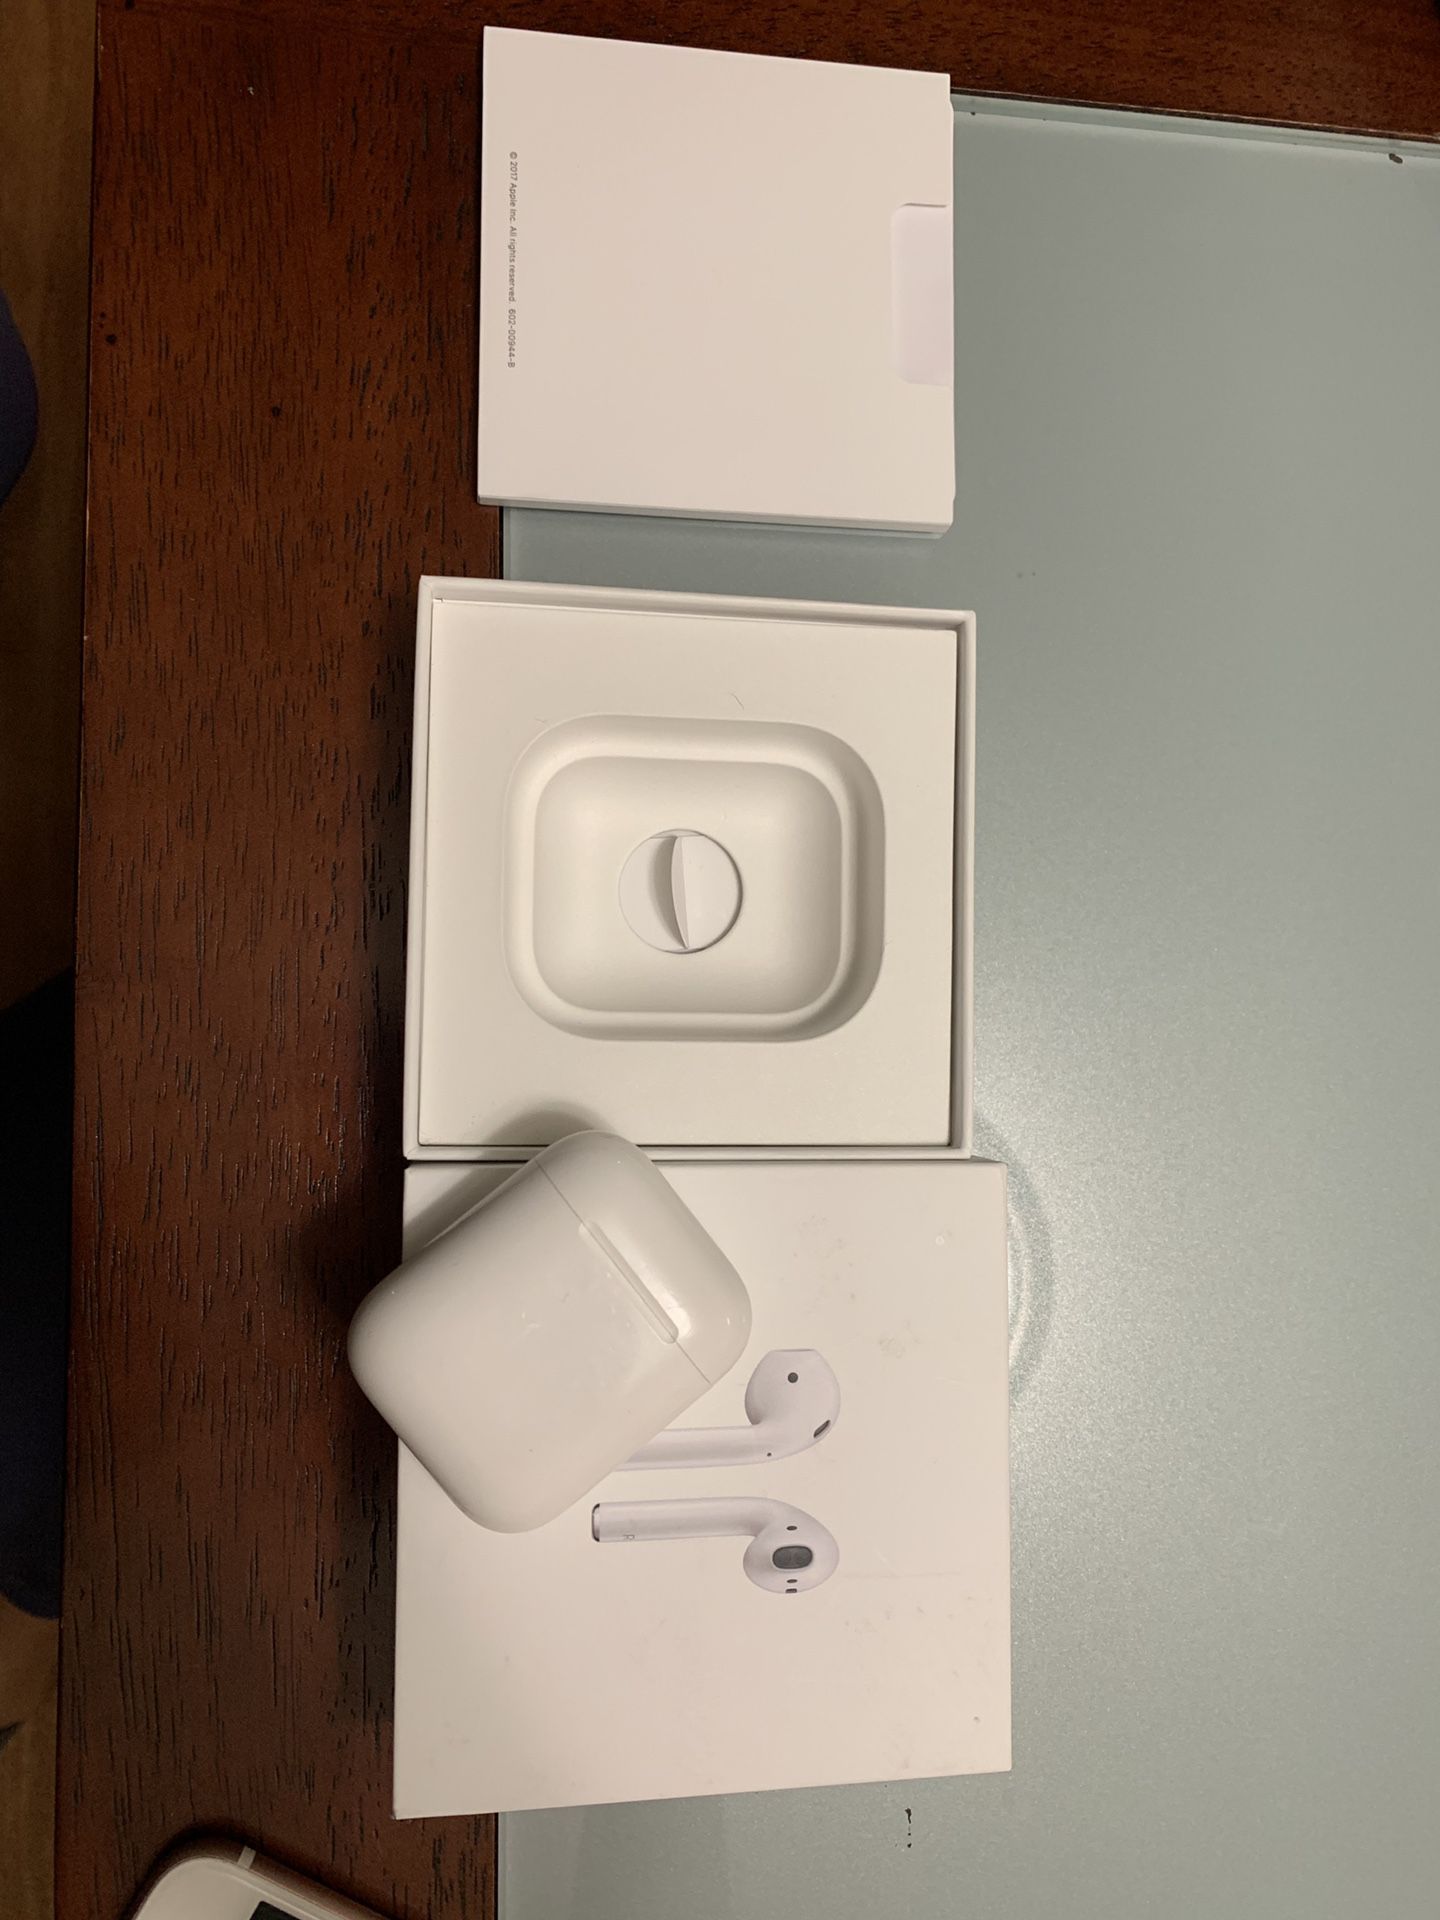 Authentic Apple AirPods (RIGHT EARBUD ONLY) w/ charging case and original box